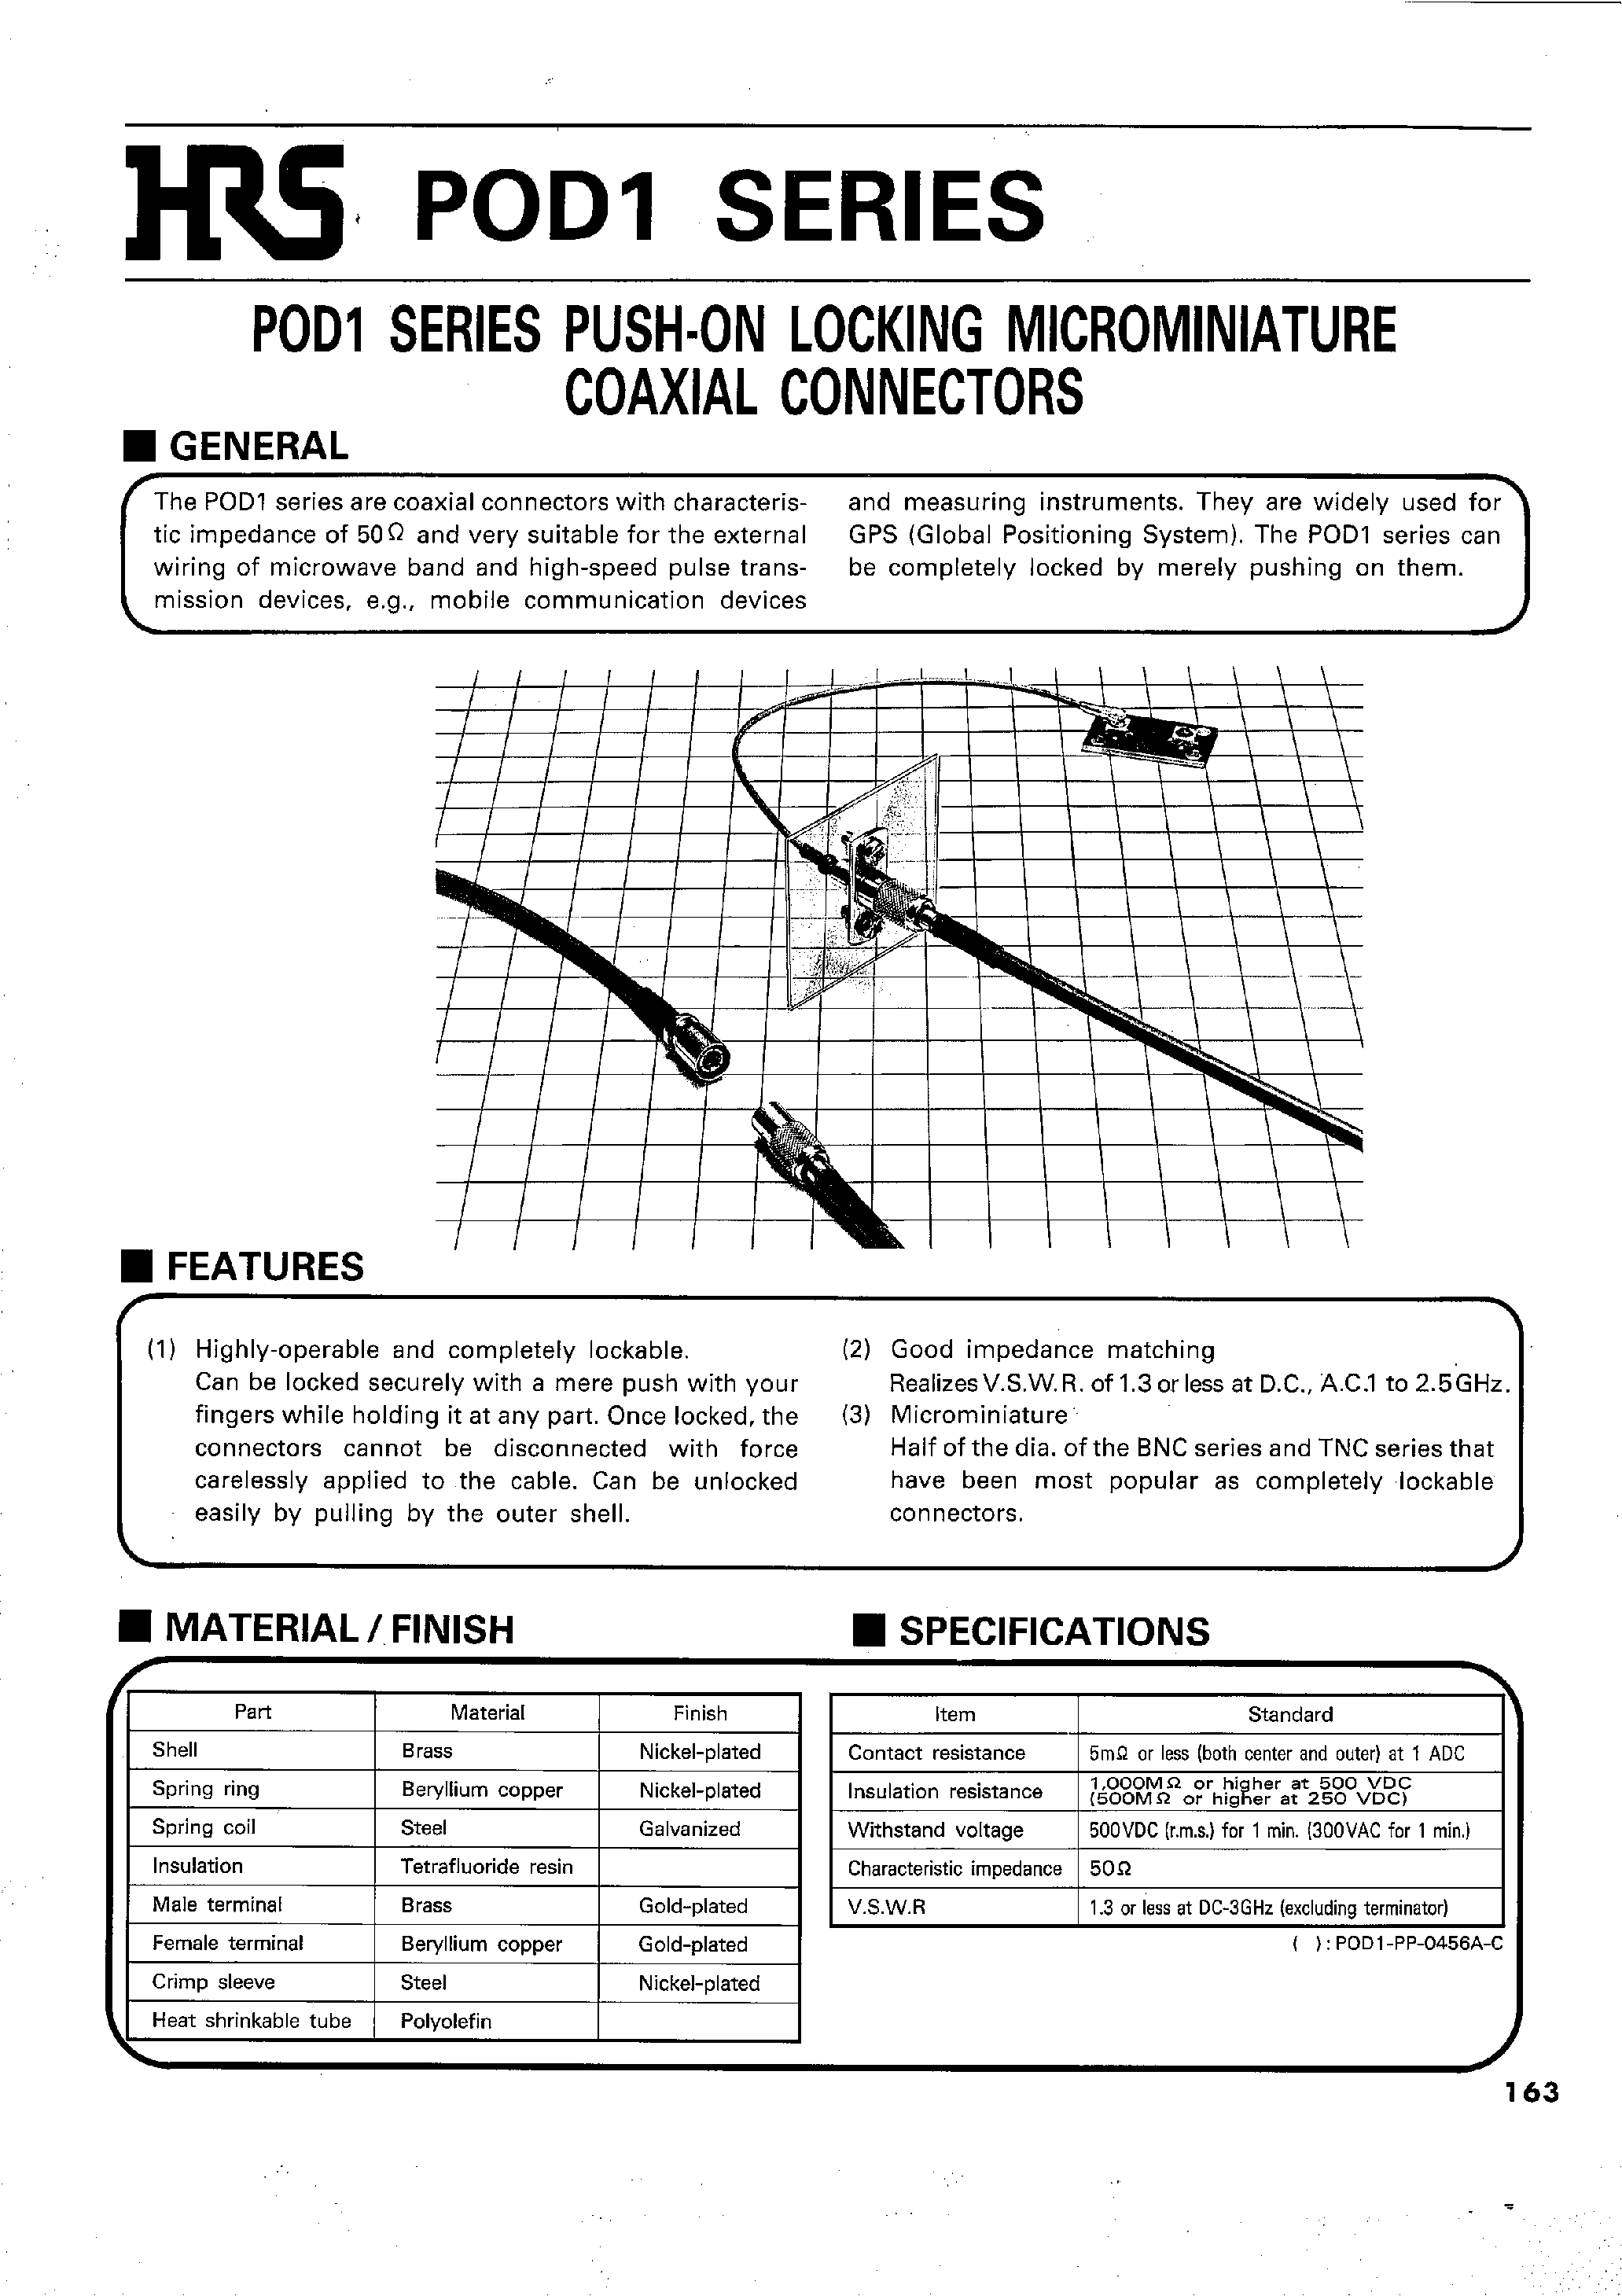 Datasheet POD1-J-1.5V-C - POD1 SERIES PUSH-ON LOCKING MICROMINIATURE COAXIAL CONNECTORS page 1